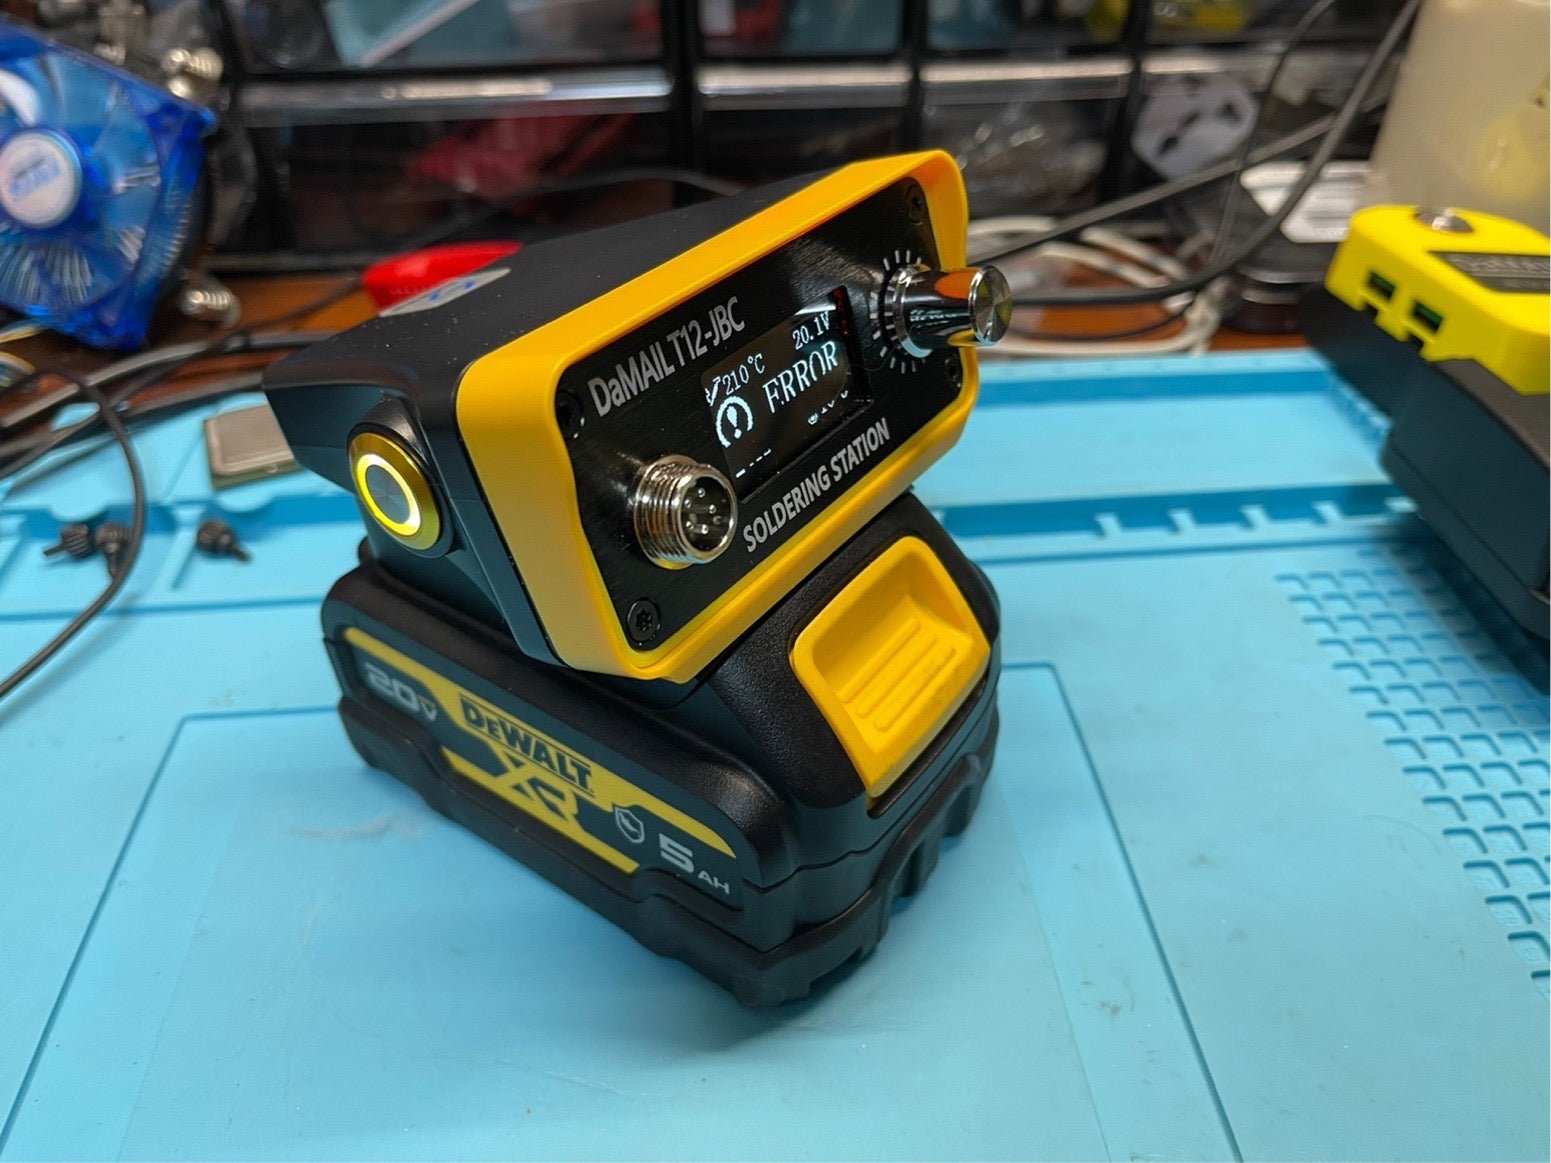 Mellif DEWALT BATTERY Soldering Iron Station is available on amazon now - Mellif Tools